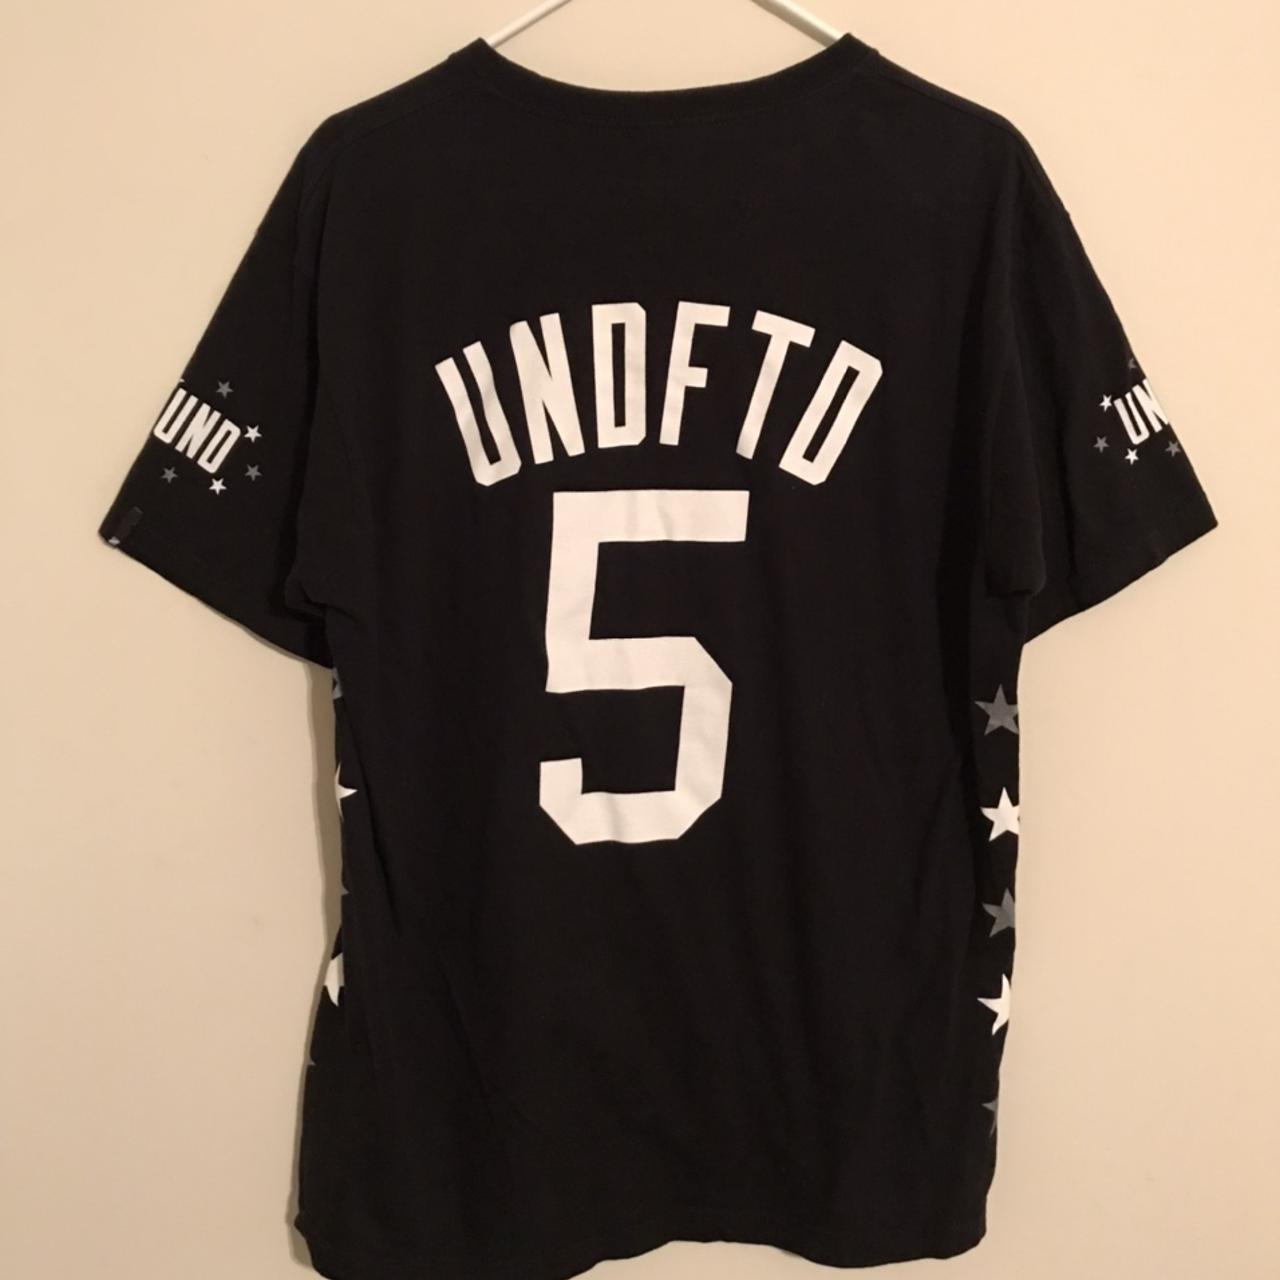 Undefeated Men's Black and White T-shirt